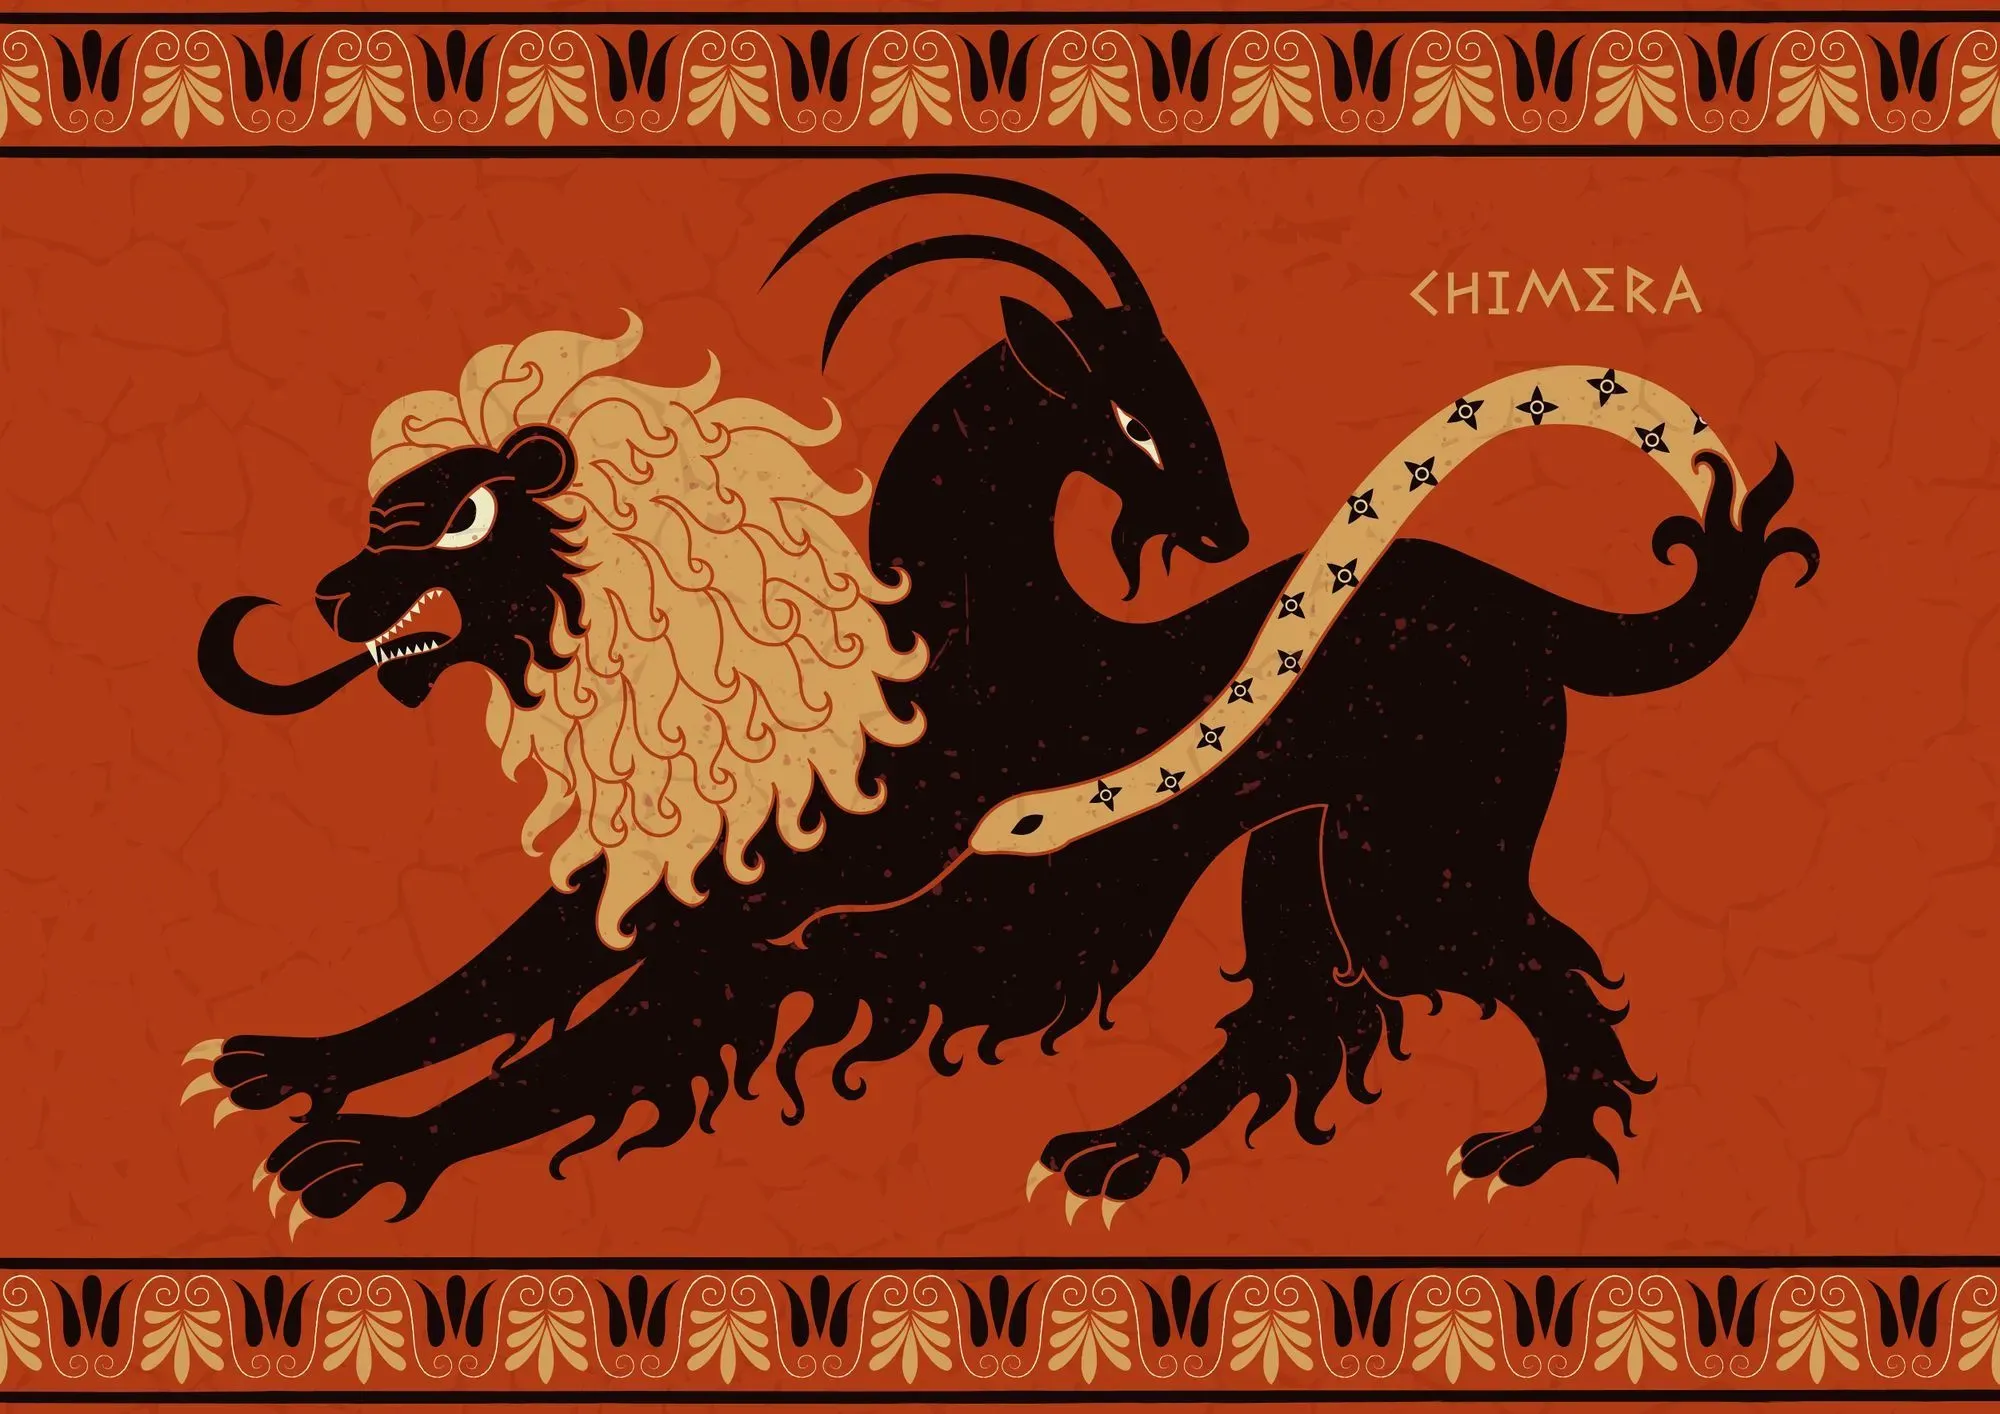 Discover dangerous yet intriguing Chimera facts!